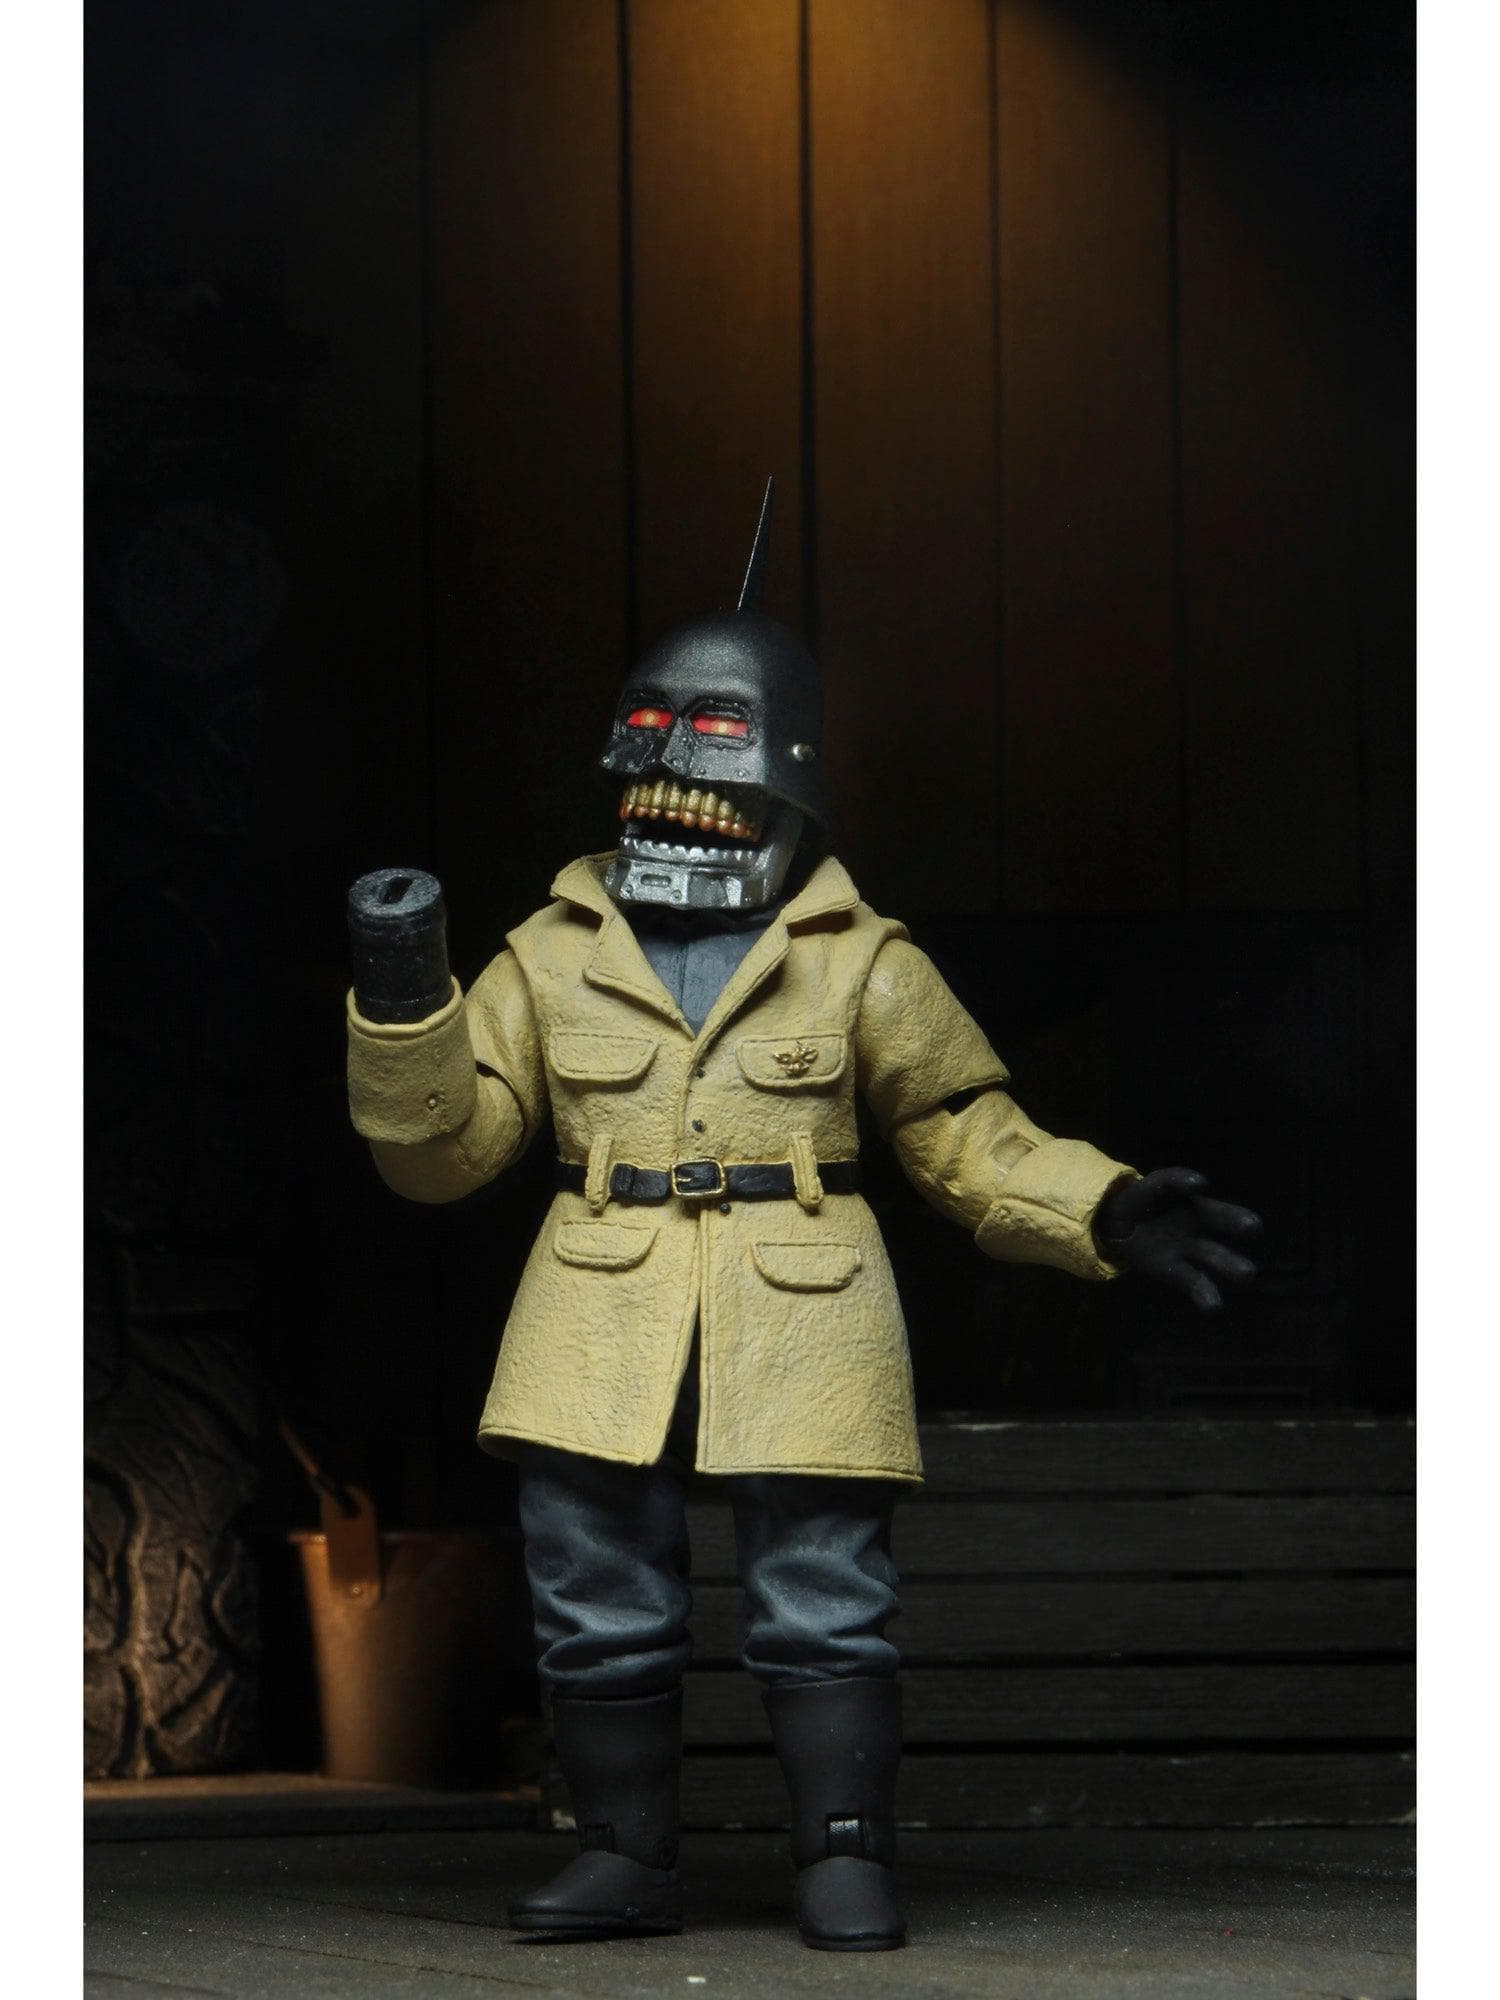 NECA - Puppet Master - 7" Scale Action Figure - Blade and Torch 2 Pack - costumes.com